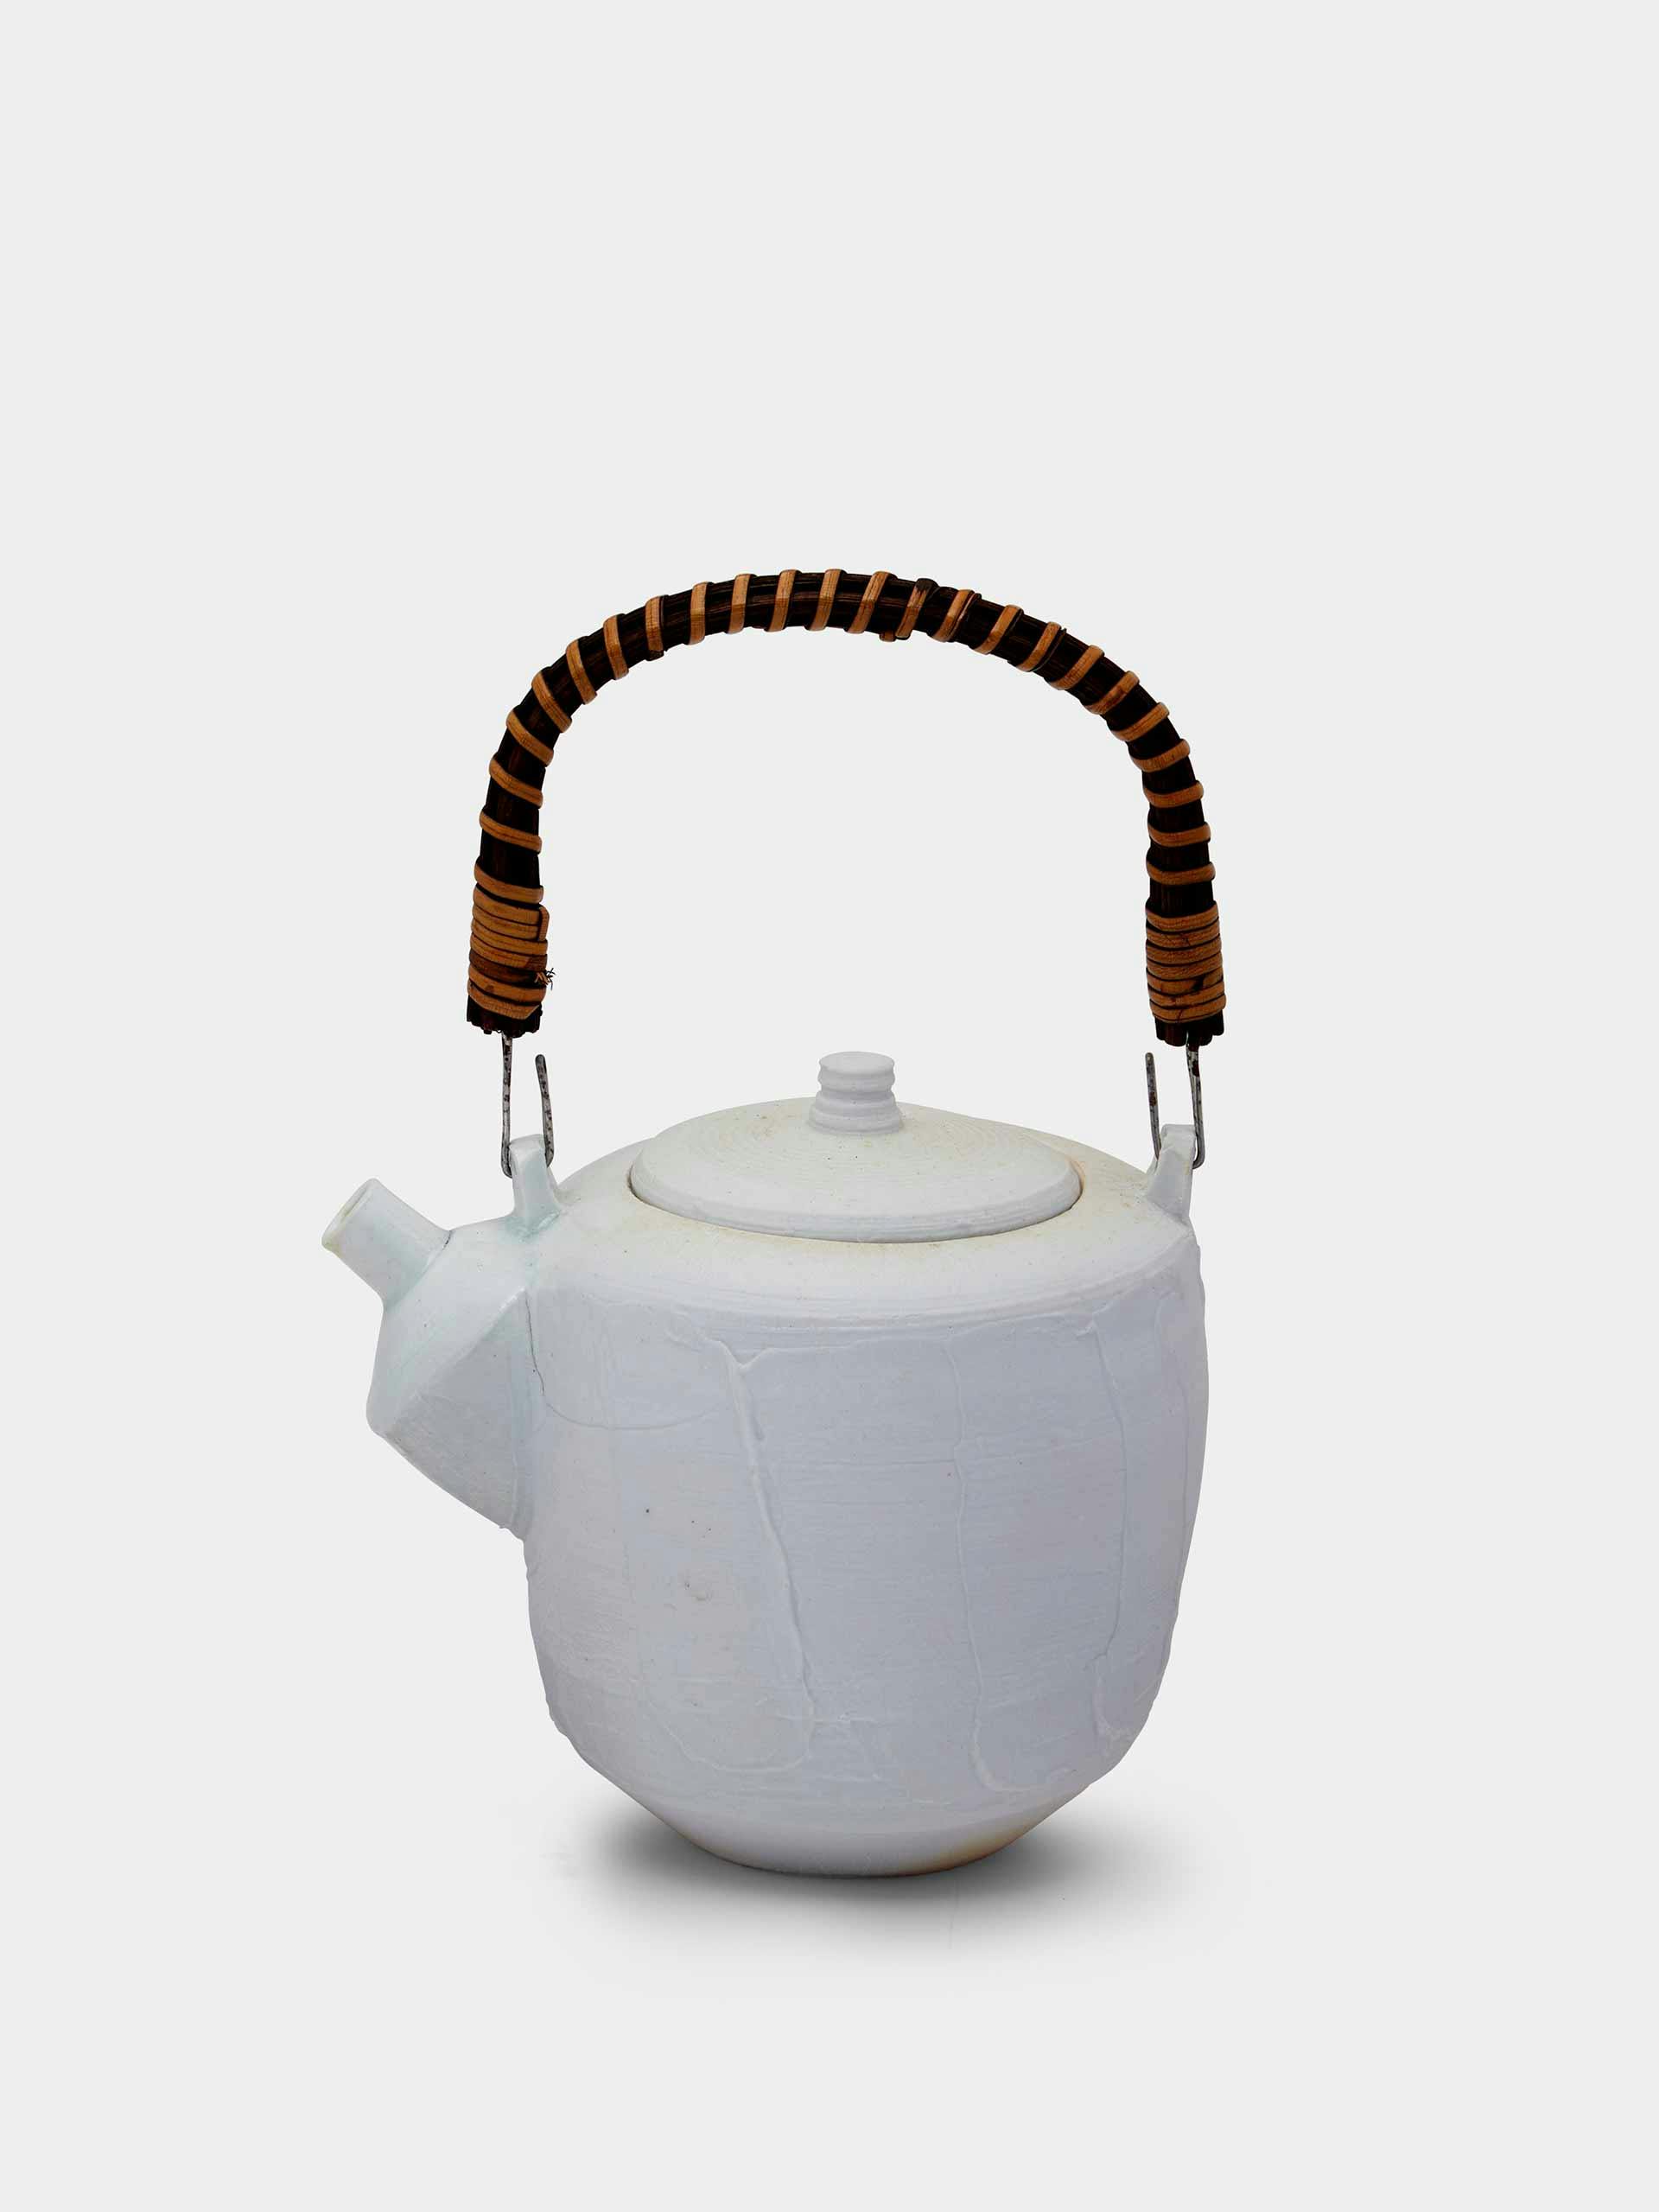 Porcelain teapot with wicker handle